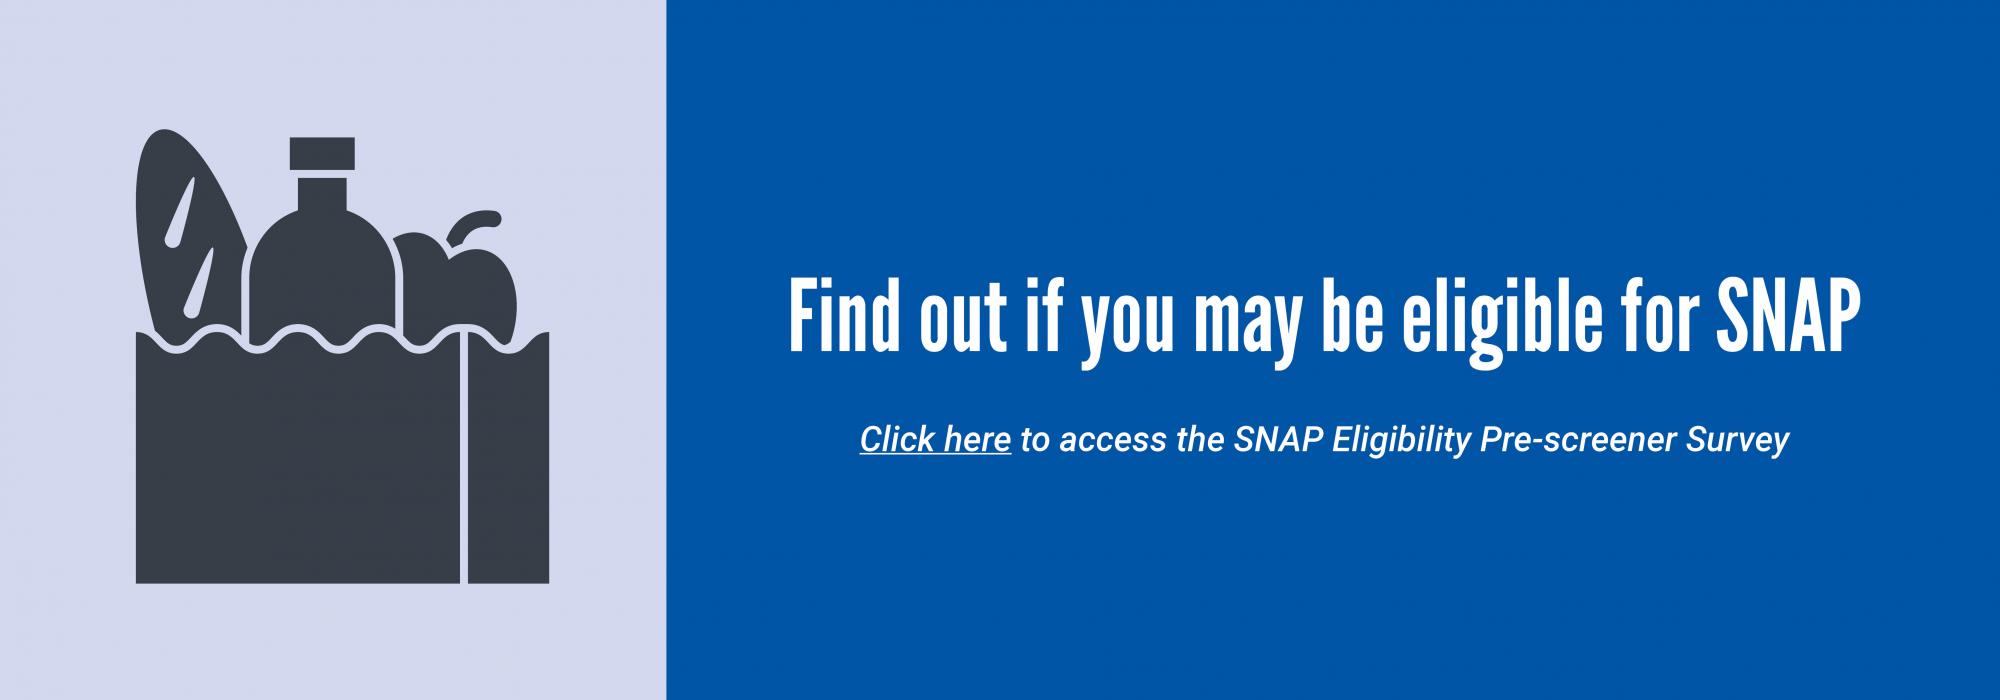 Looking for Food Benefits? Find out if you may be eligible for SNAP.